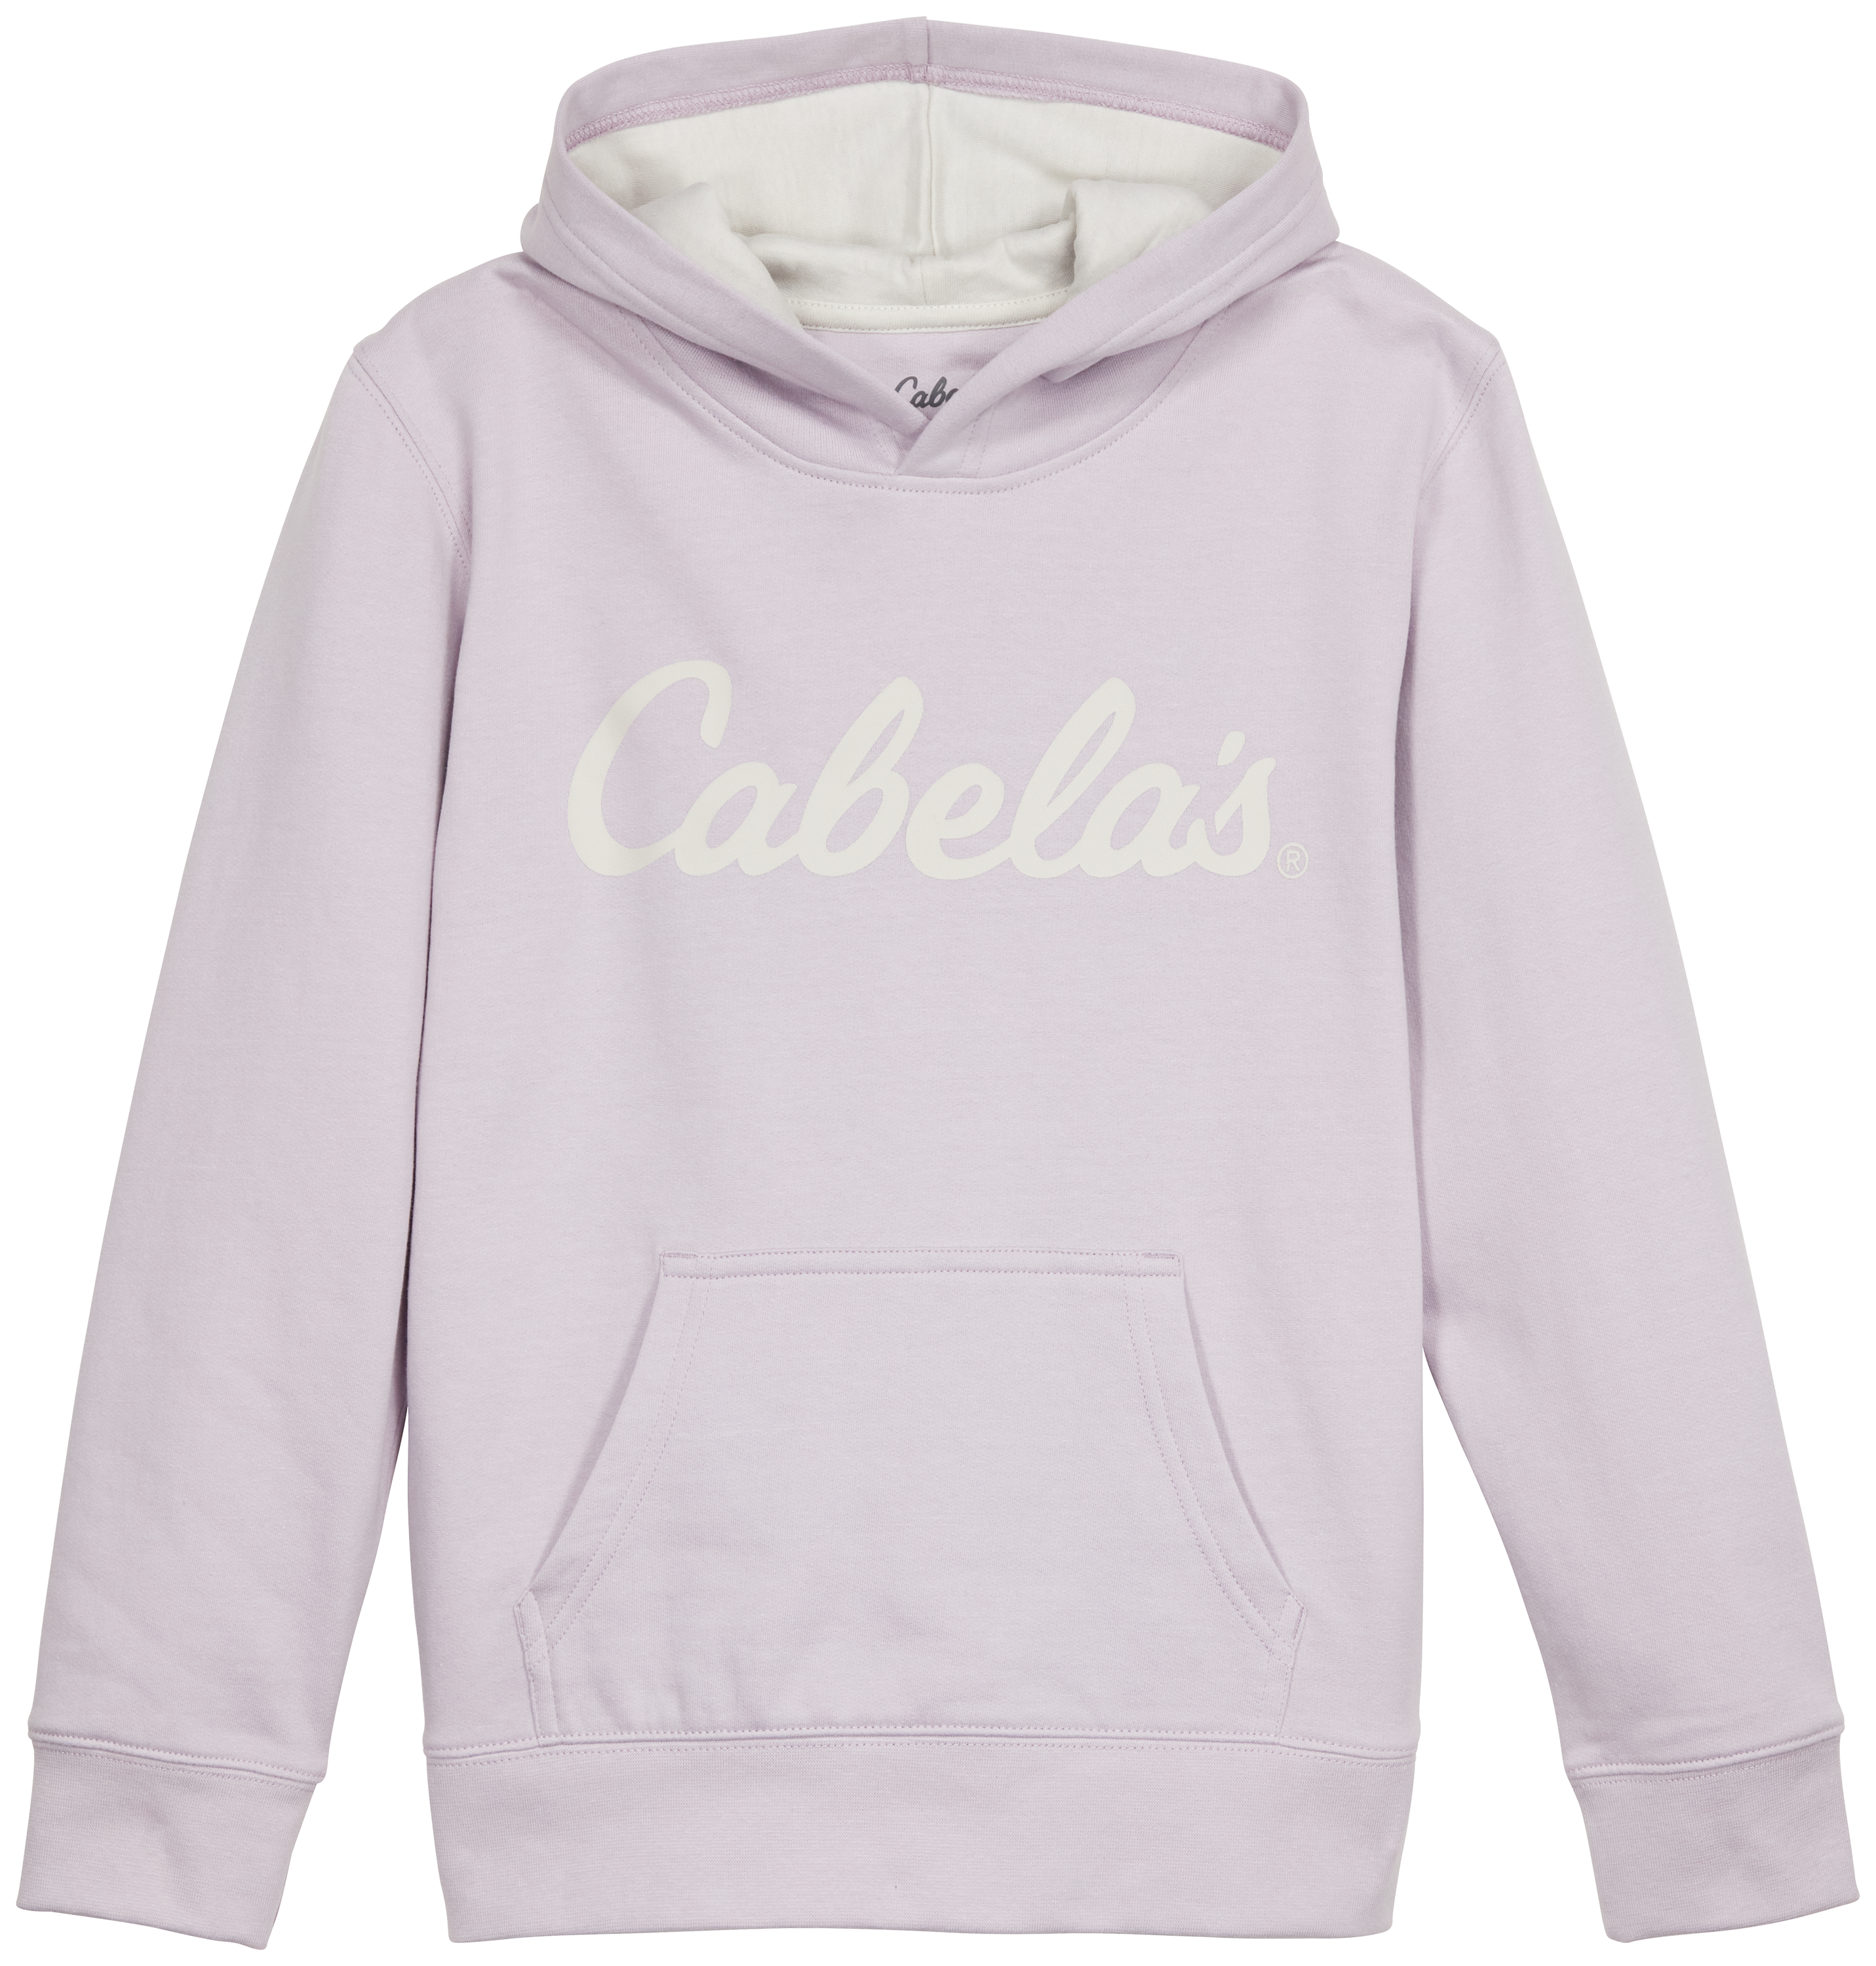 Cabela's Long-Sleeve Hoodie for Toddlers - Lilac - 3T